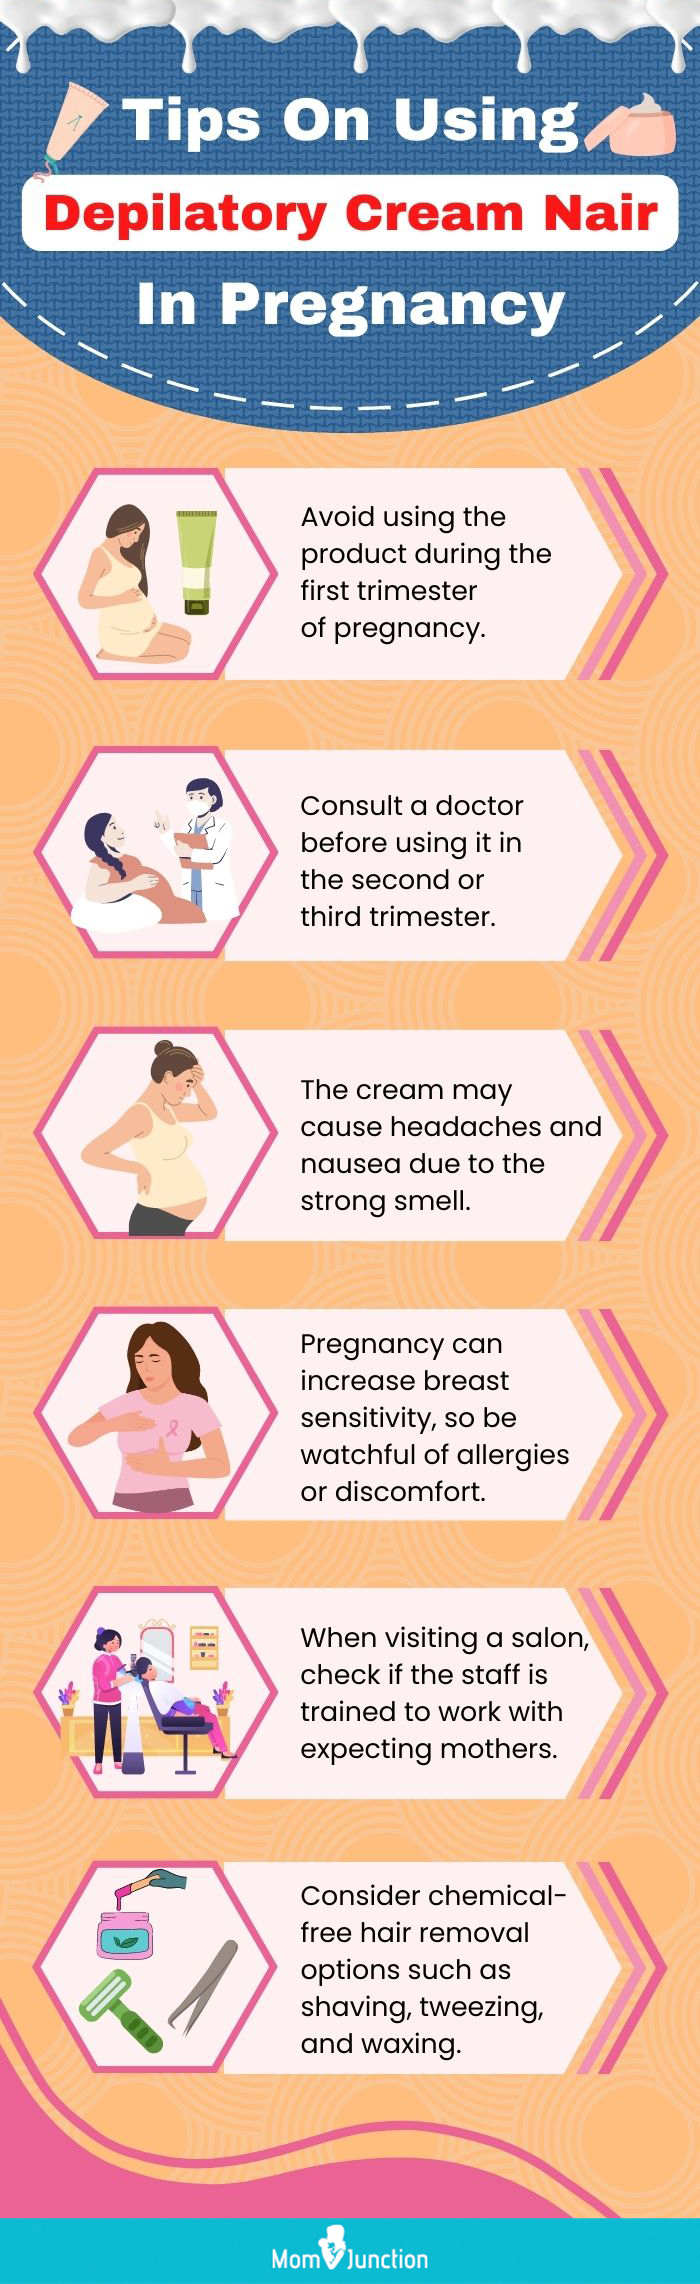 tips on using depilatory cream nair in pregnancy [infographic]